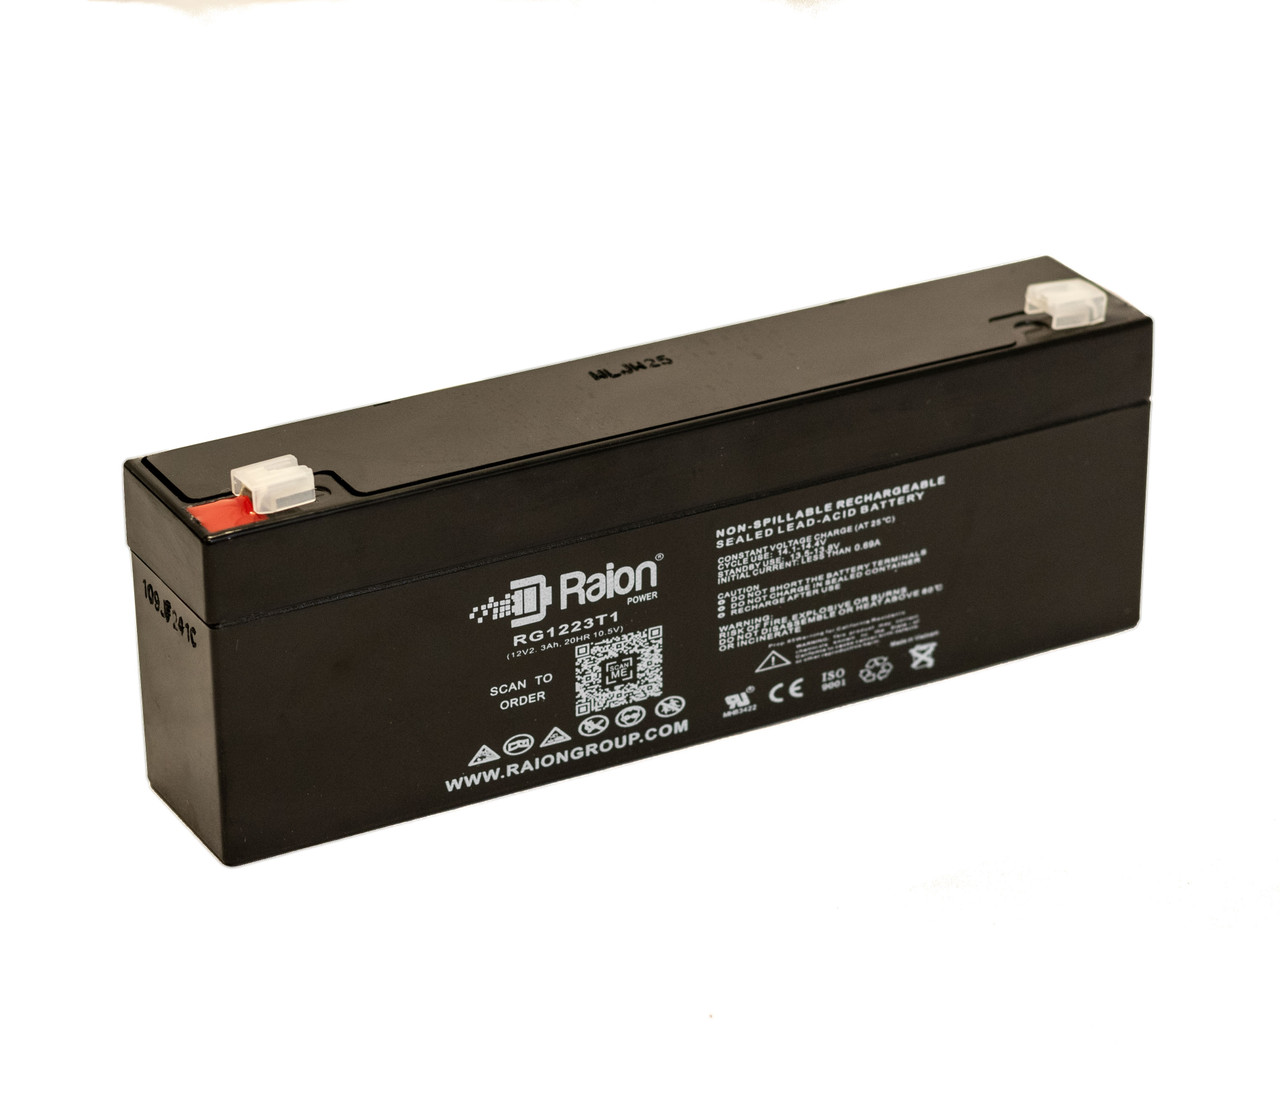 Raion Power RG1223T1 Replacement Battery for Arjo-Century 440